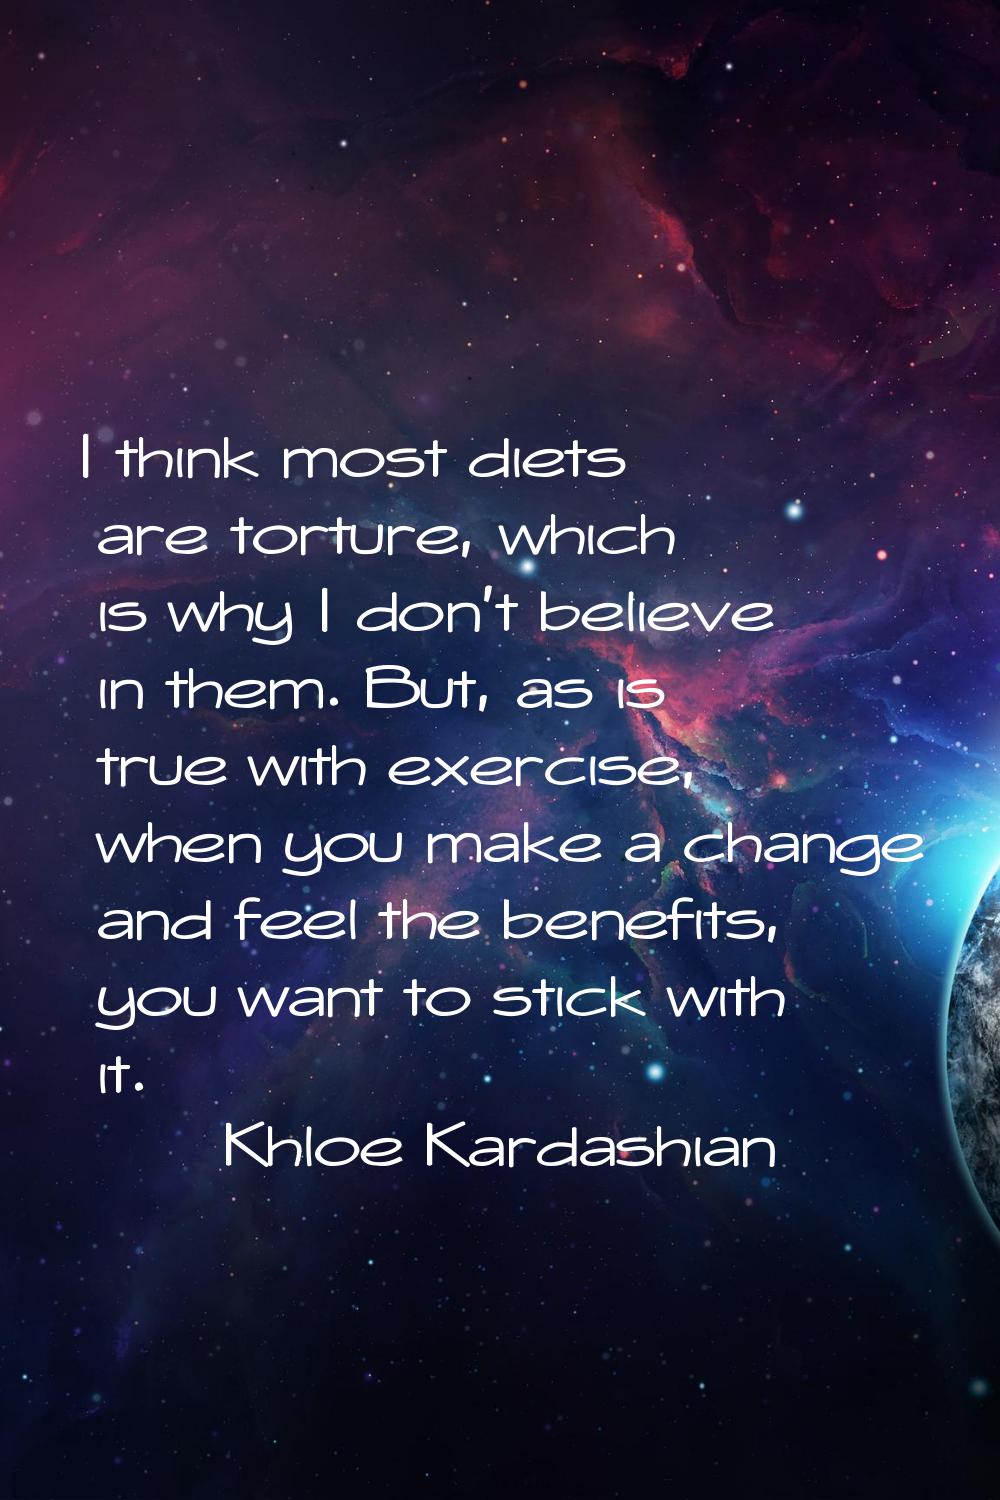 I think most diets are torture, which is why I don't believe in them. But, as is true with exercise